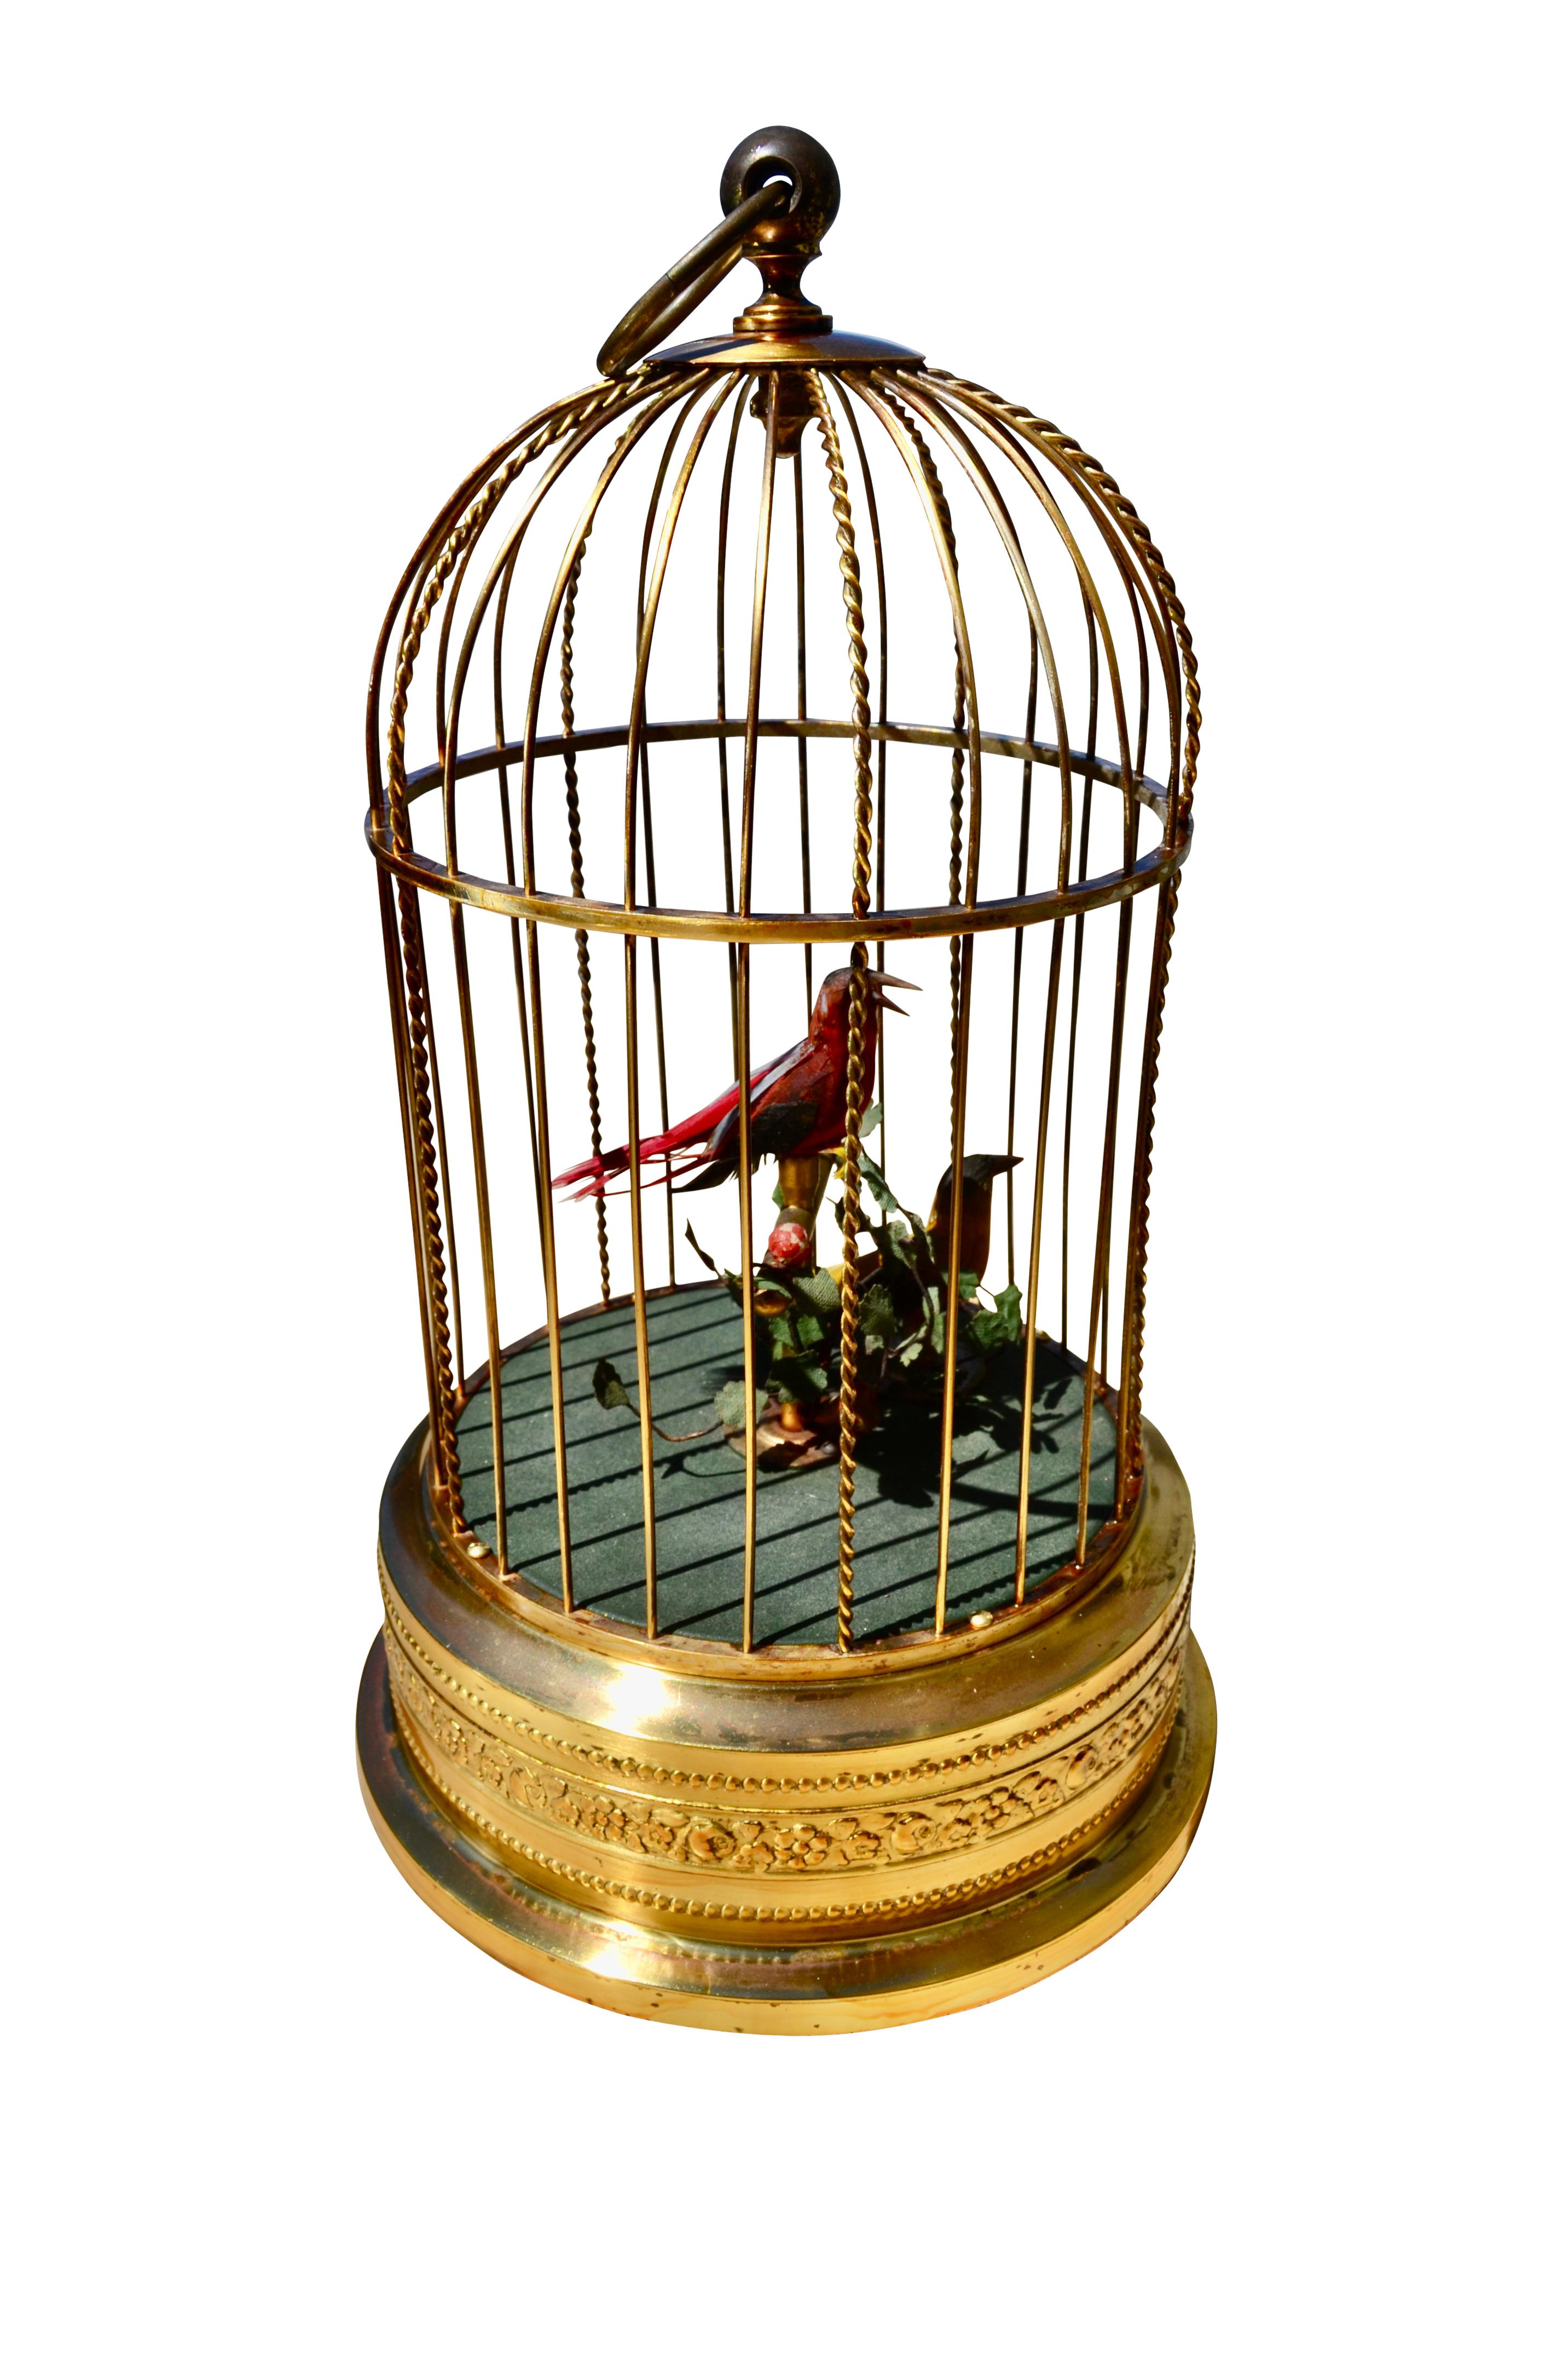 This 1950's German made Brass Musical bird cage automaton features a pair colourful feathered birds perched on a brass stand with foliage atop a grenvelvet base. The underside houses the fixed in place winding key and on off lever. Upon winding of